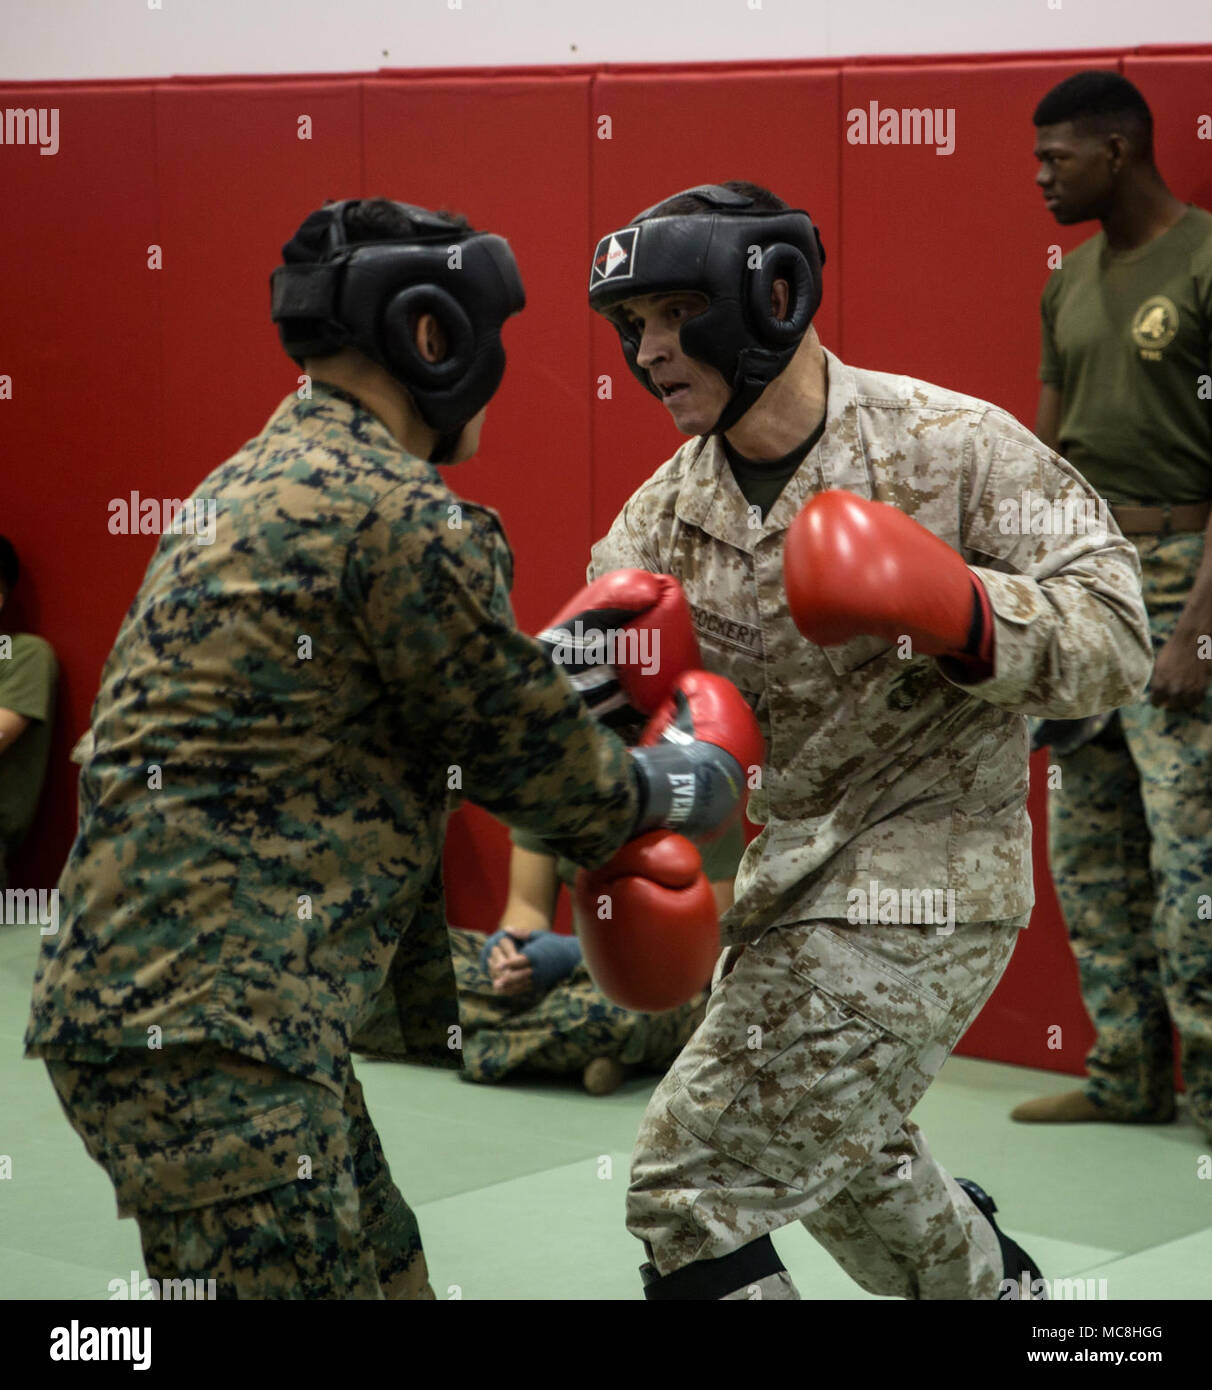 Col. Charles B. Dockery and Lance Cpl. Jose C. Tanonreyes kick box during a black belt course on March 23, 2018, Camp Foster, Okinawa, Japan. Marine Corps Martial Arts Program is an integrated, weapon-based system that incorporates the full spectrum of the force continuum on the battlefield, and contributes to the mental, character and physical development of Marines. Col. Dockery is the chief of staff for 1st Marine Aircraft Wing. Tanonreyes is a tax clerk for Headquarters and Support Battalion, Marine Corps Installations Pacific. Stock Photo